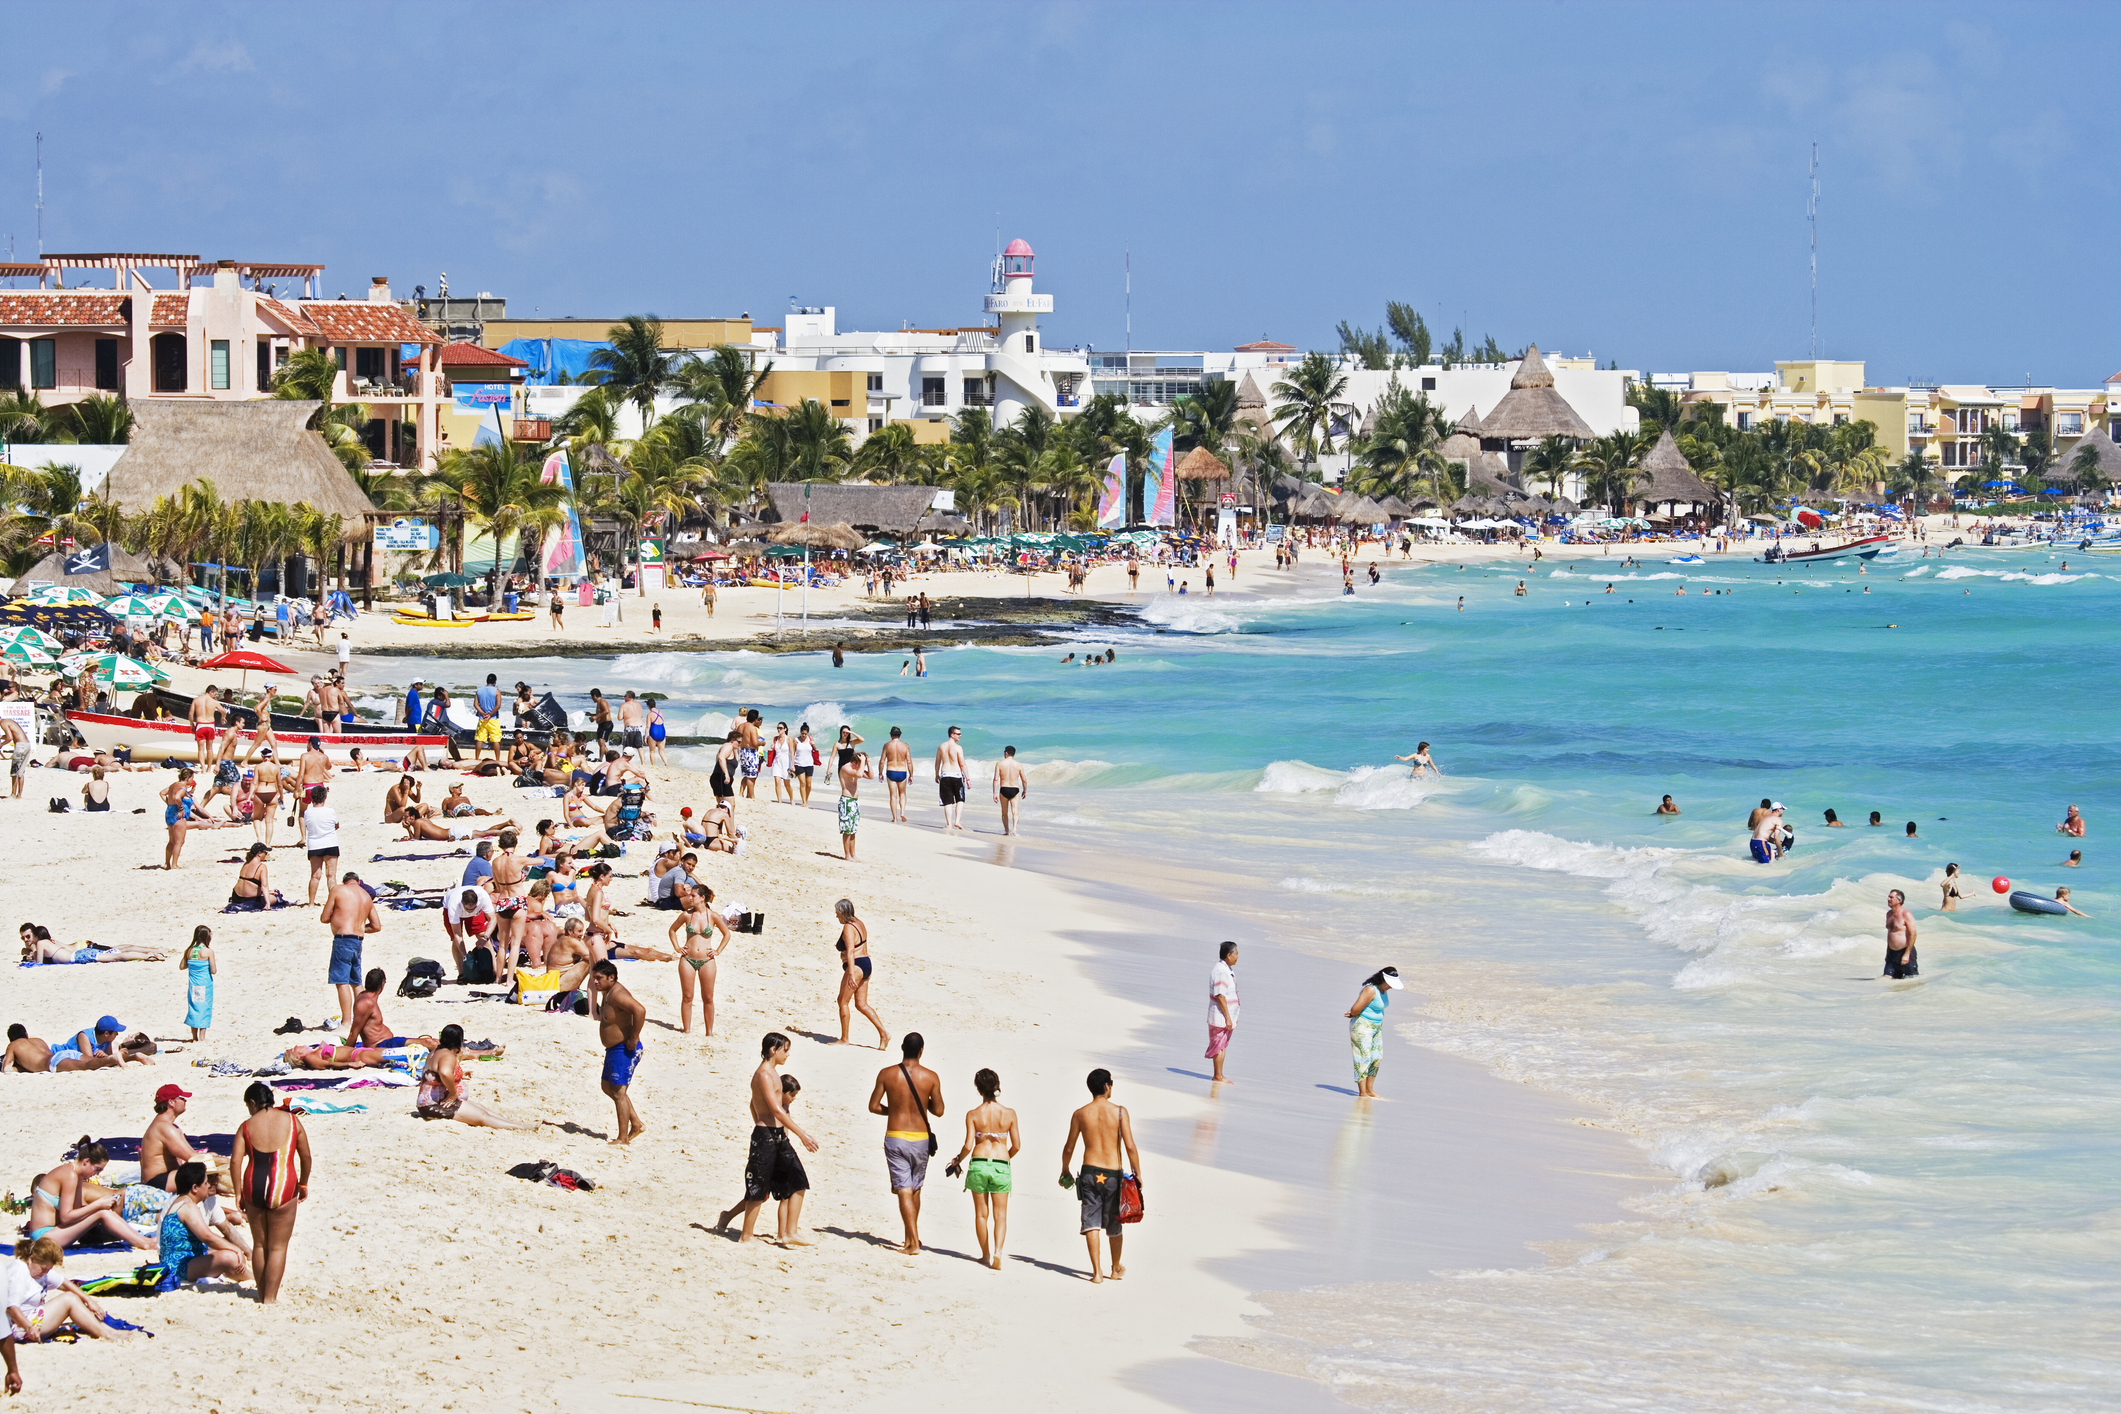 A Canadian Tourist Was Found Dead At A Mexican Resort. Her Boyfriend Has Been Detained.